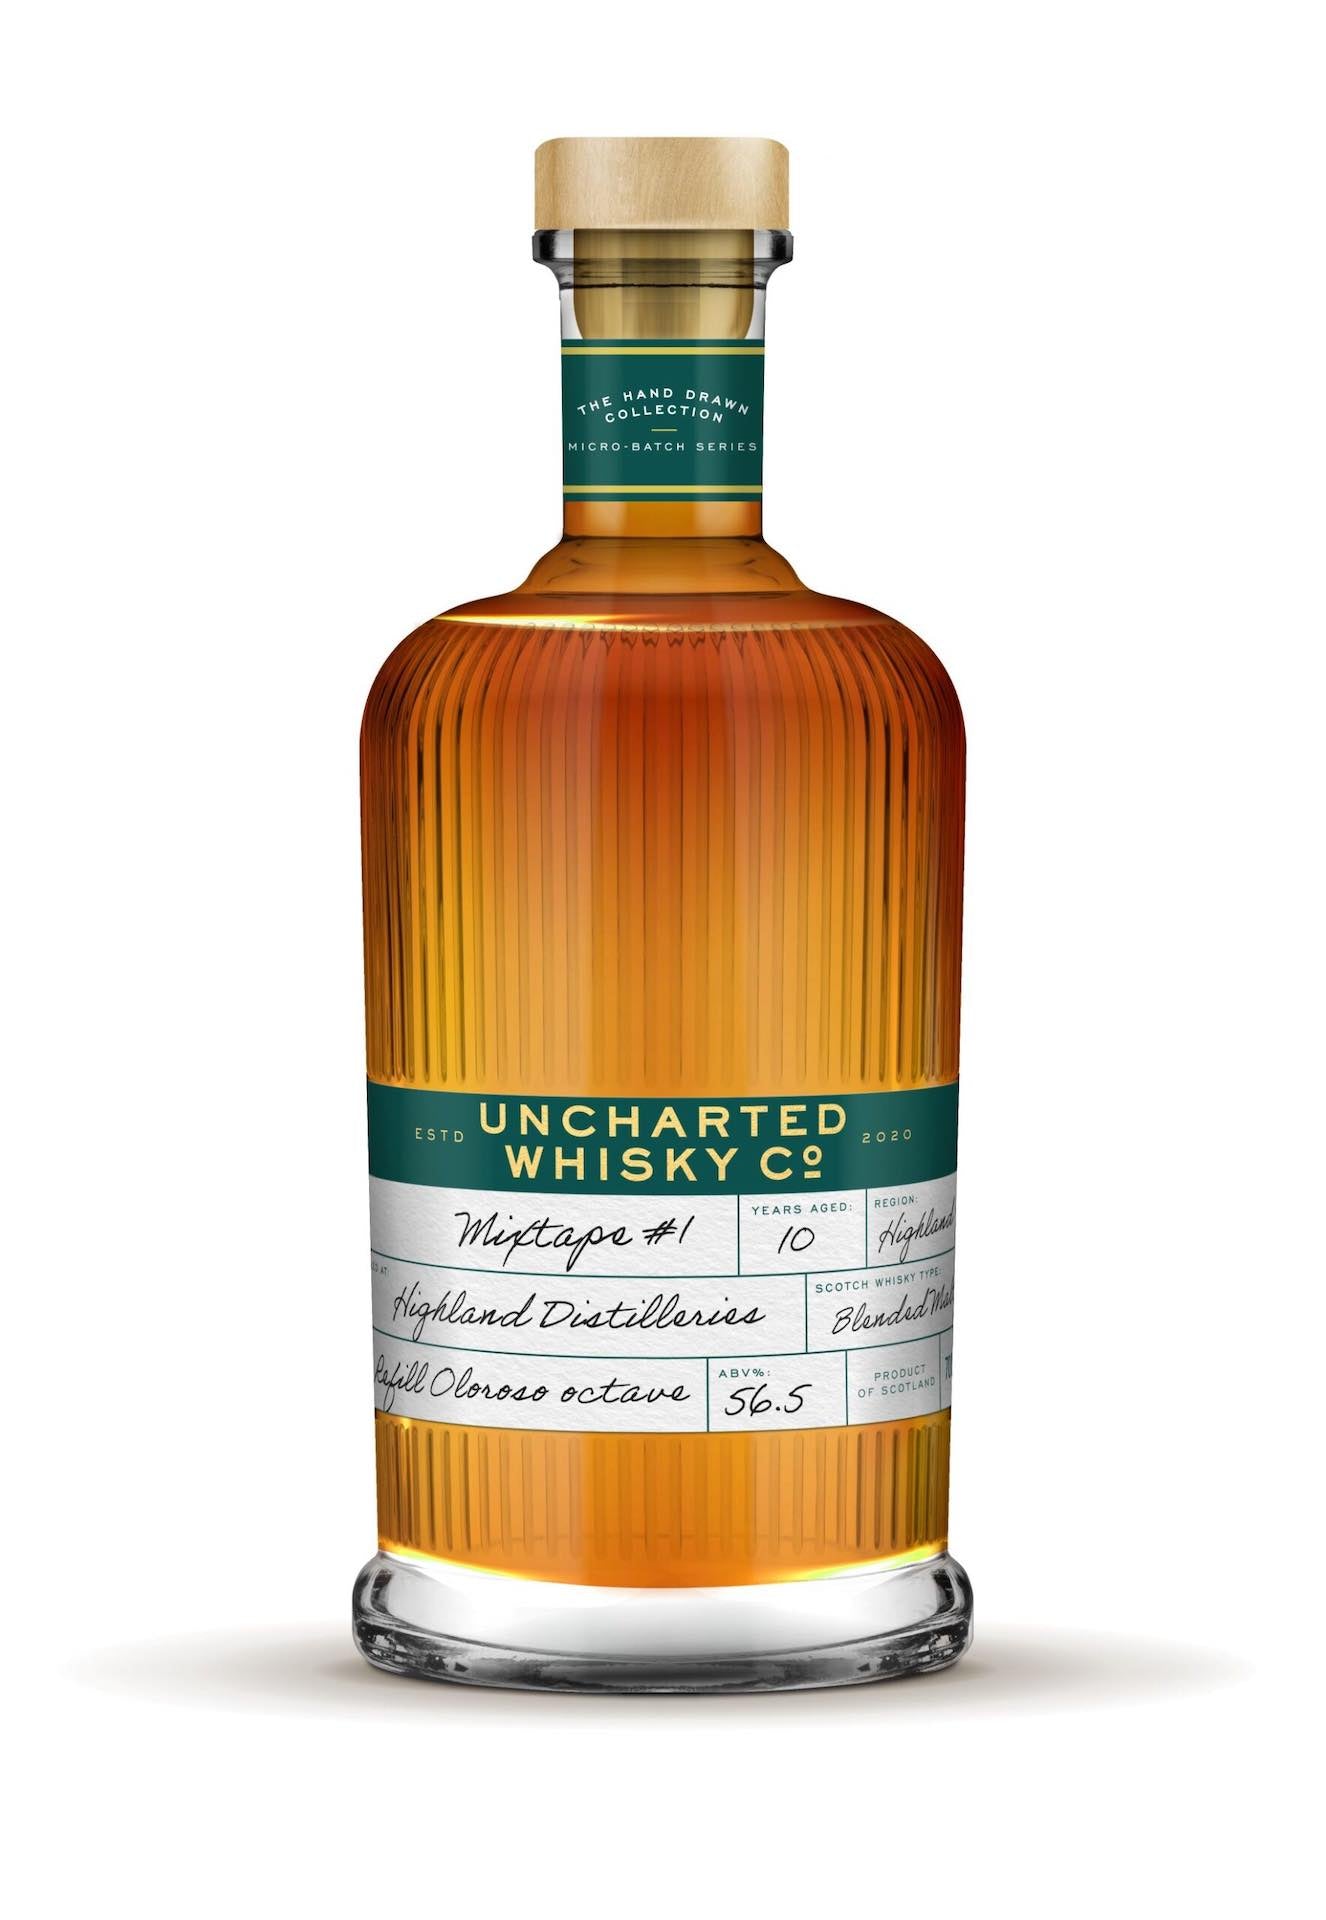 Uncharted Whisky, Mixtape #1, Blended Malt 10 Year Old